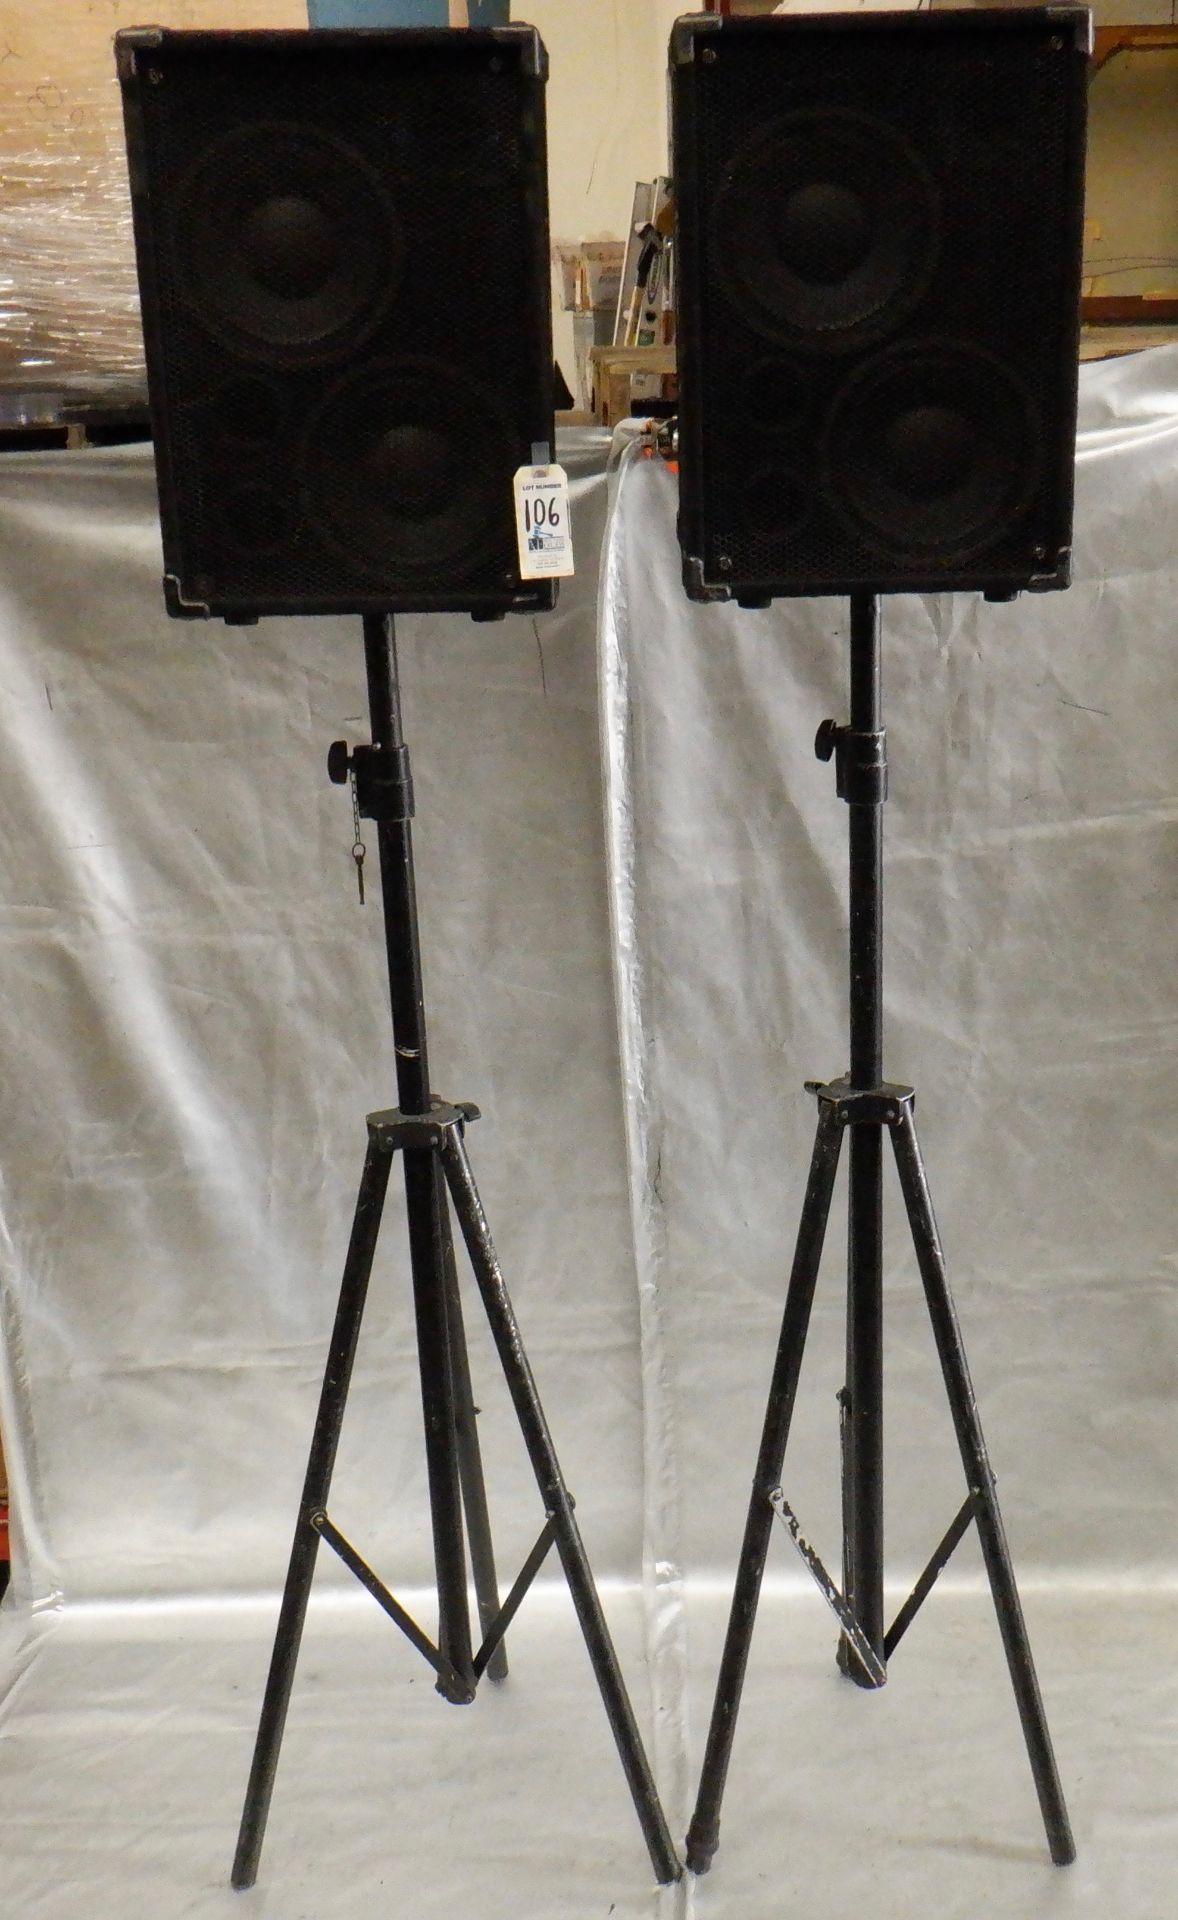 LOT OF 2 ACOUSTIC BASS SPEAKERS WITH STANDS - Image 2 of 7